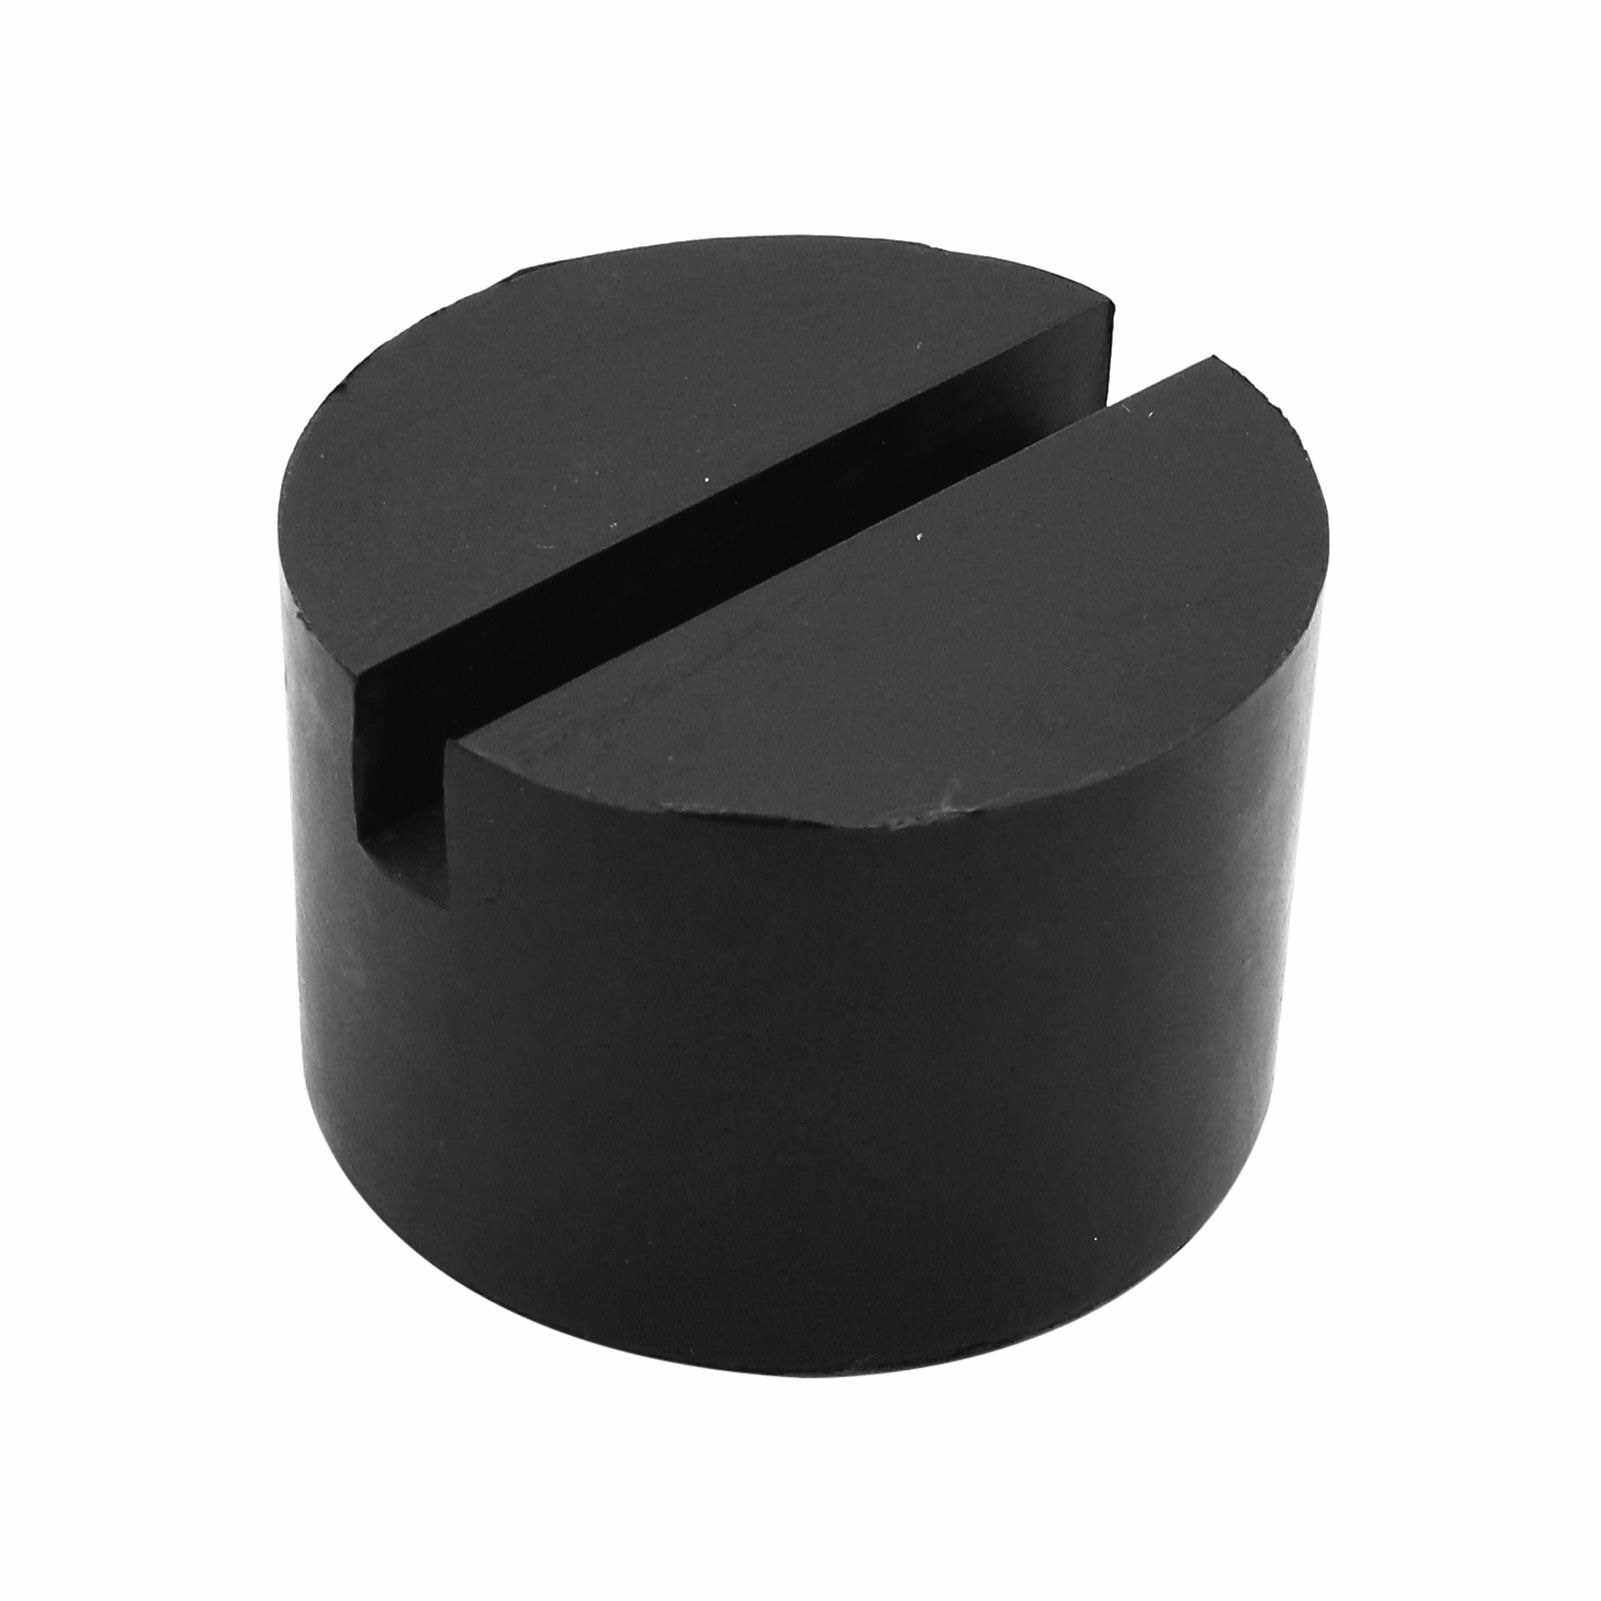 Large Universal Car Jack Pad Pallet Protective Rubber Support Pad Lifter Jack Pad Rubber Block Frame Rail Protector (Standard)